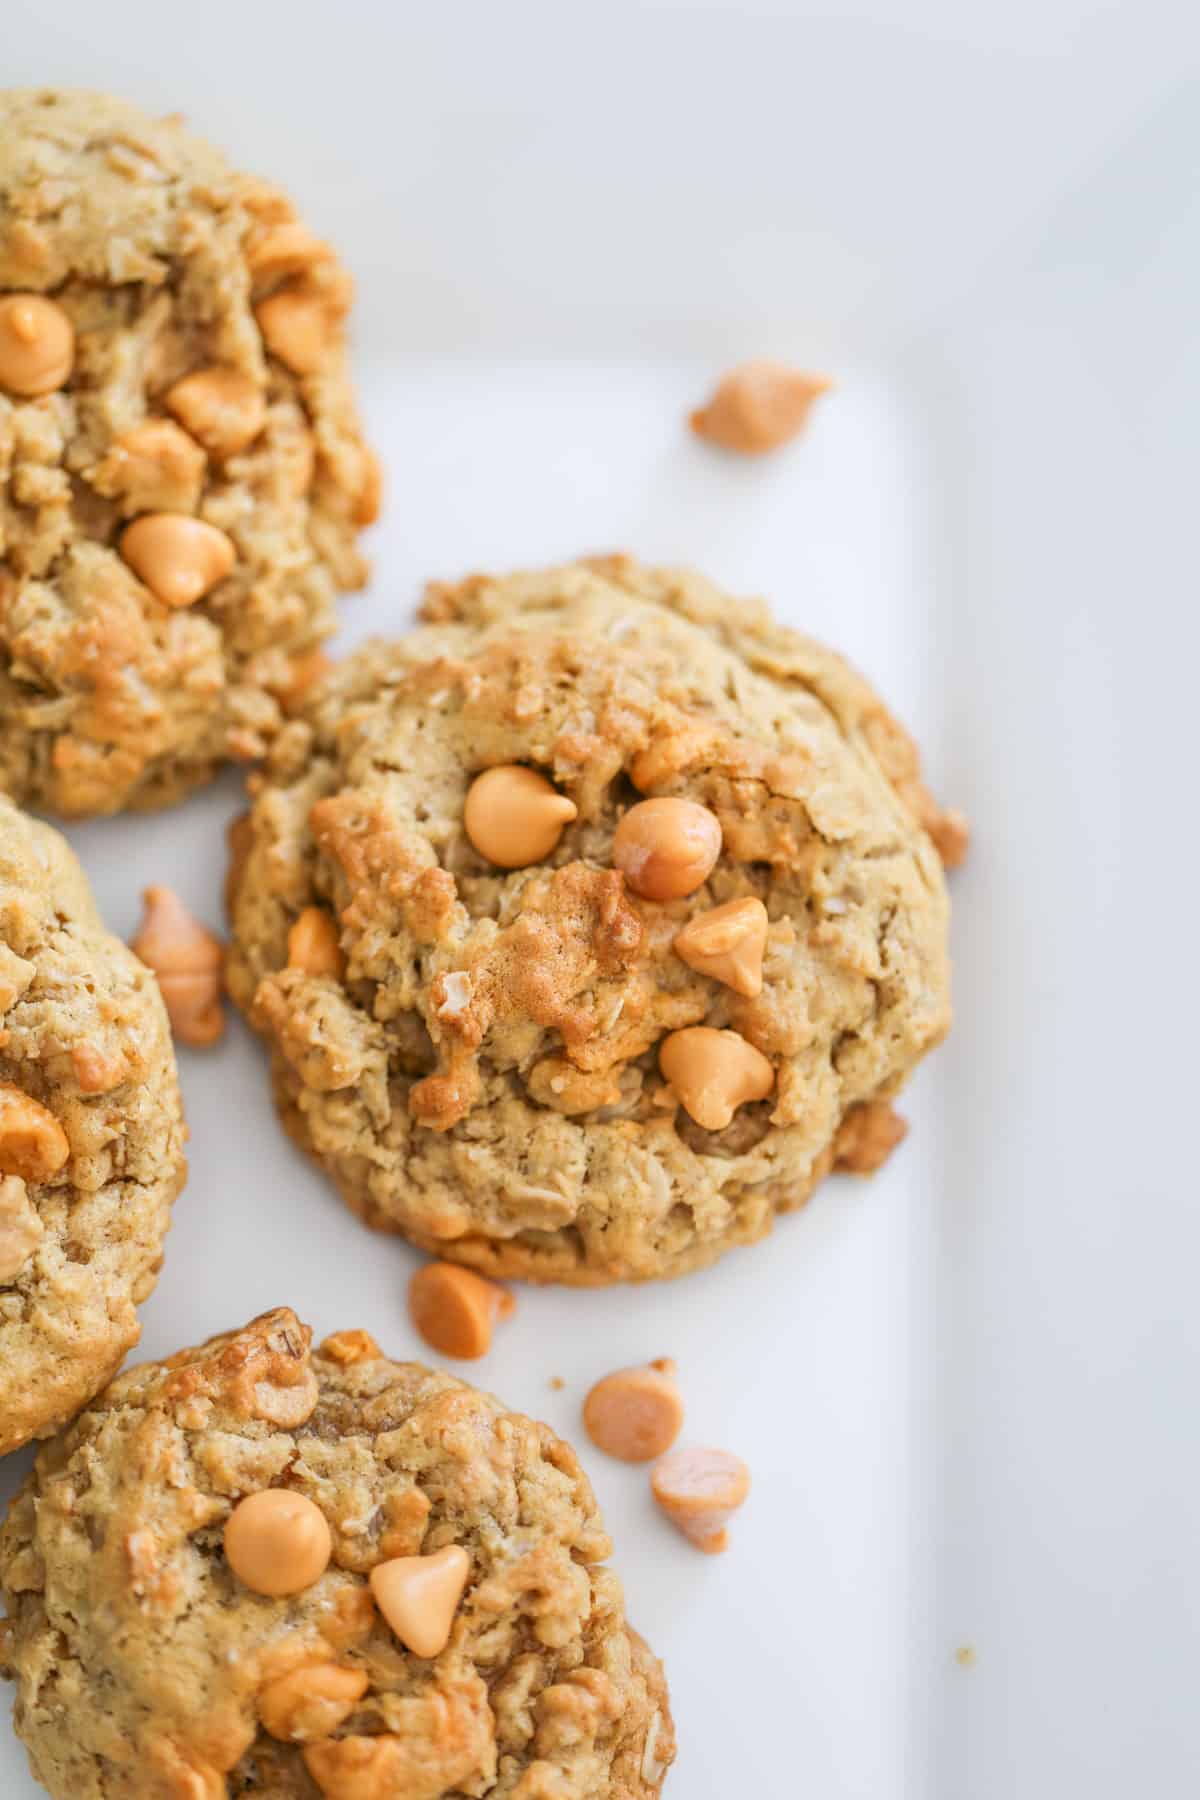 Peanut Butter Oatmeal Scotchies Cookies